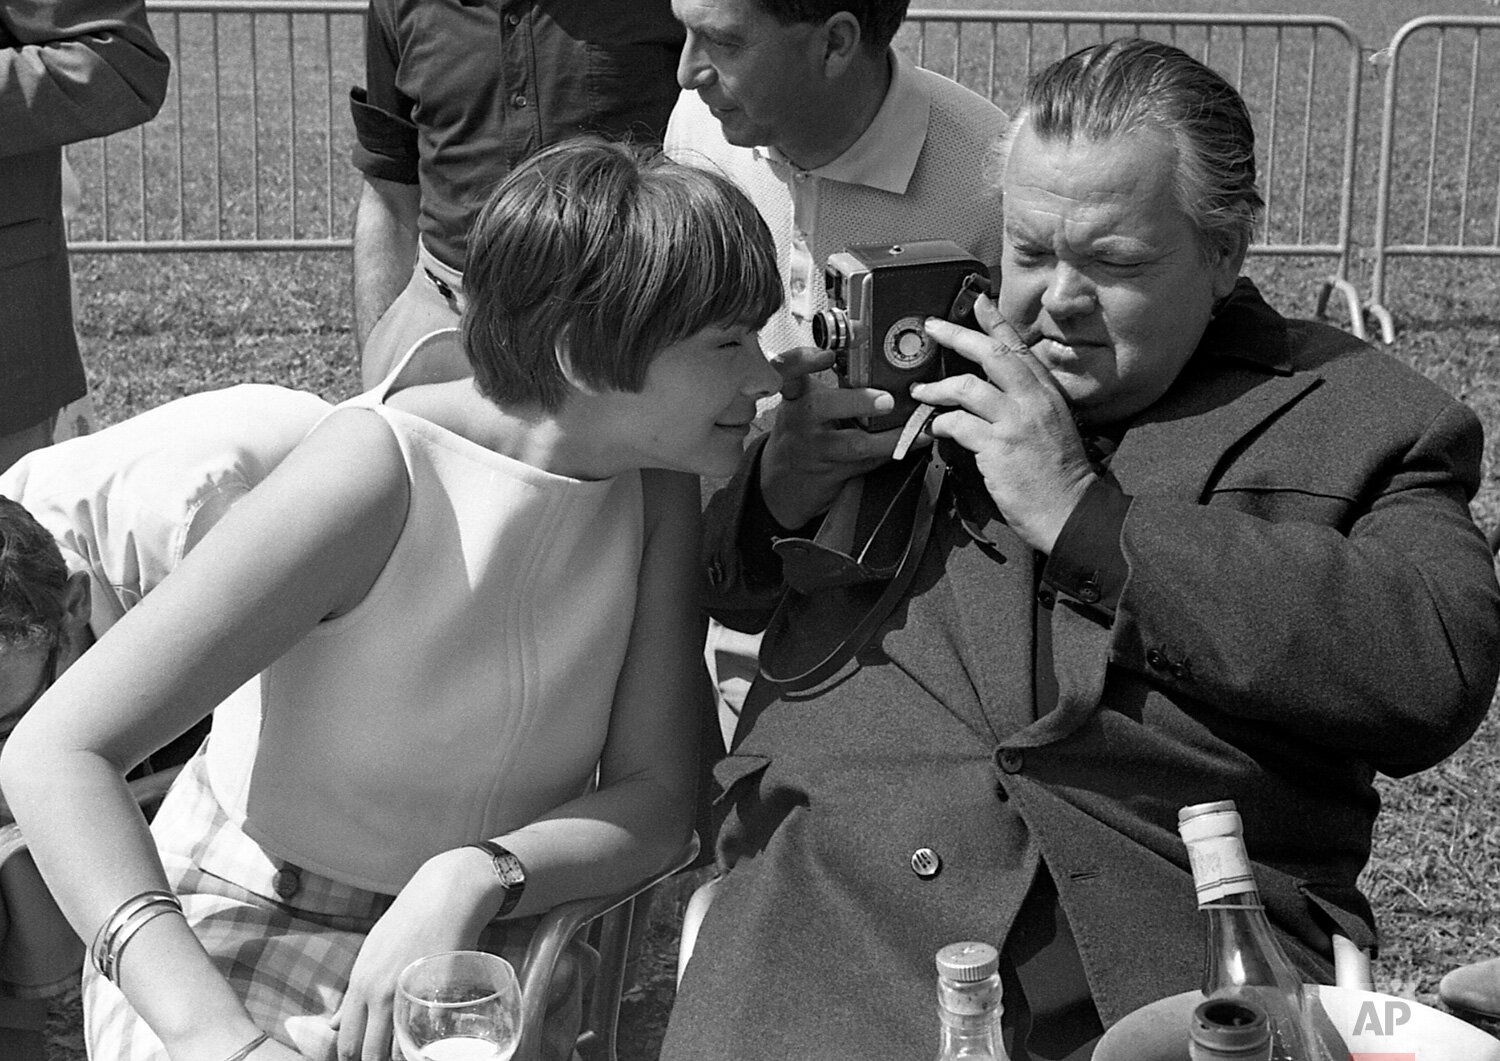  French actress Macha Meril peers into the lens of the camera as she is filmed by Orson Welles, during a garden party at the Cannes Film Festival, at the Mandelieu Golf Club, on May 8, 1966. (AP Photo/Jean-Jacques Levy) 